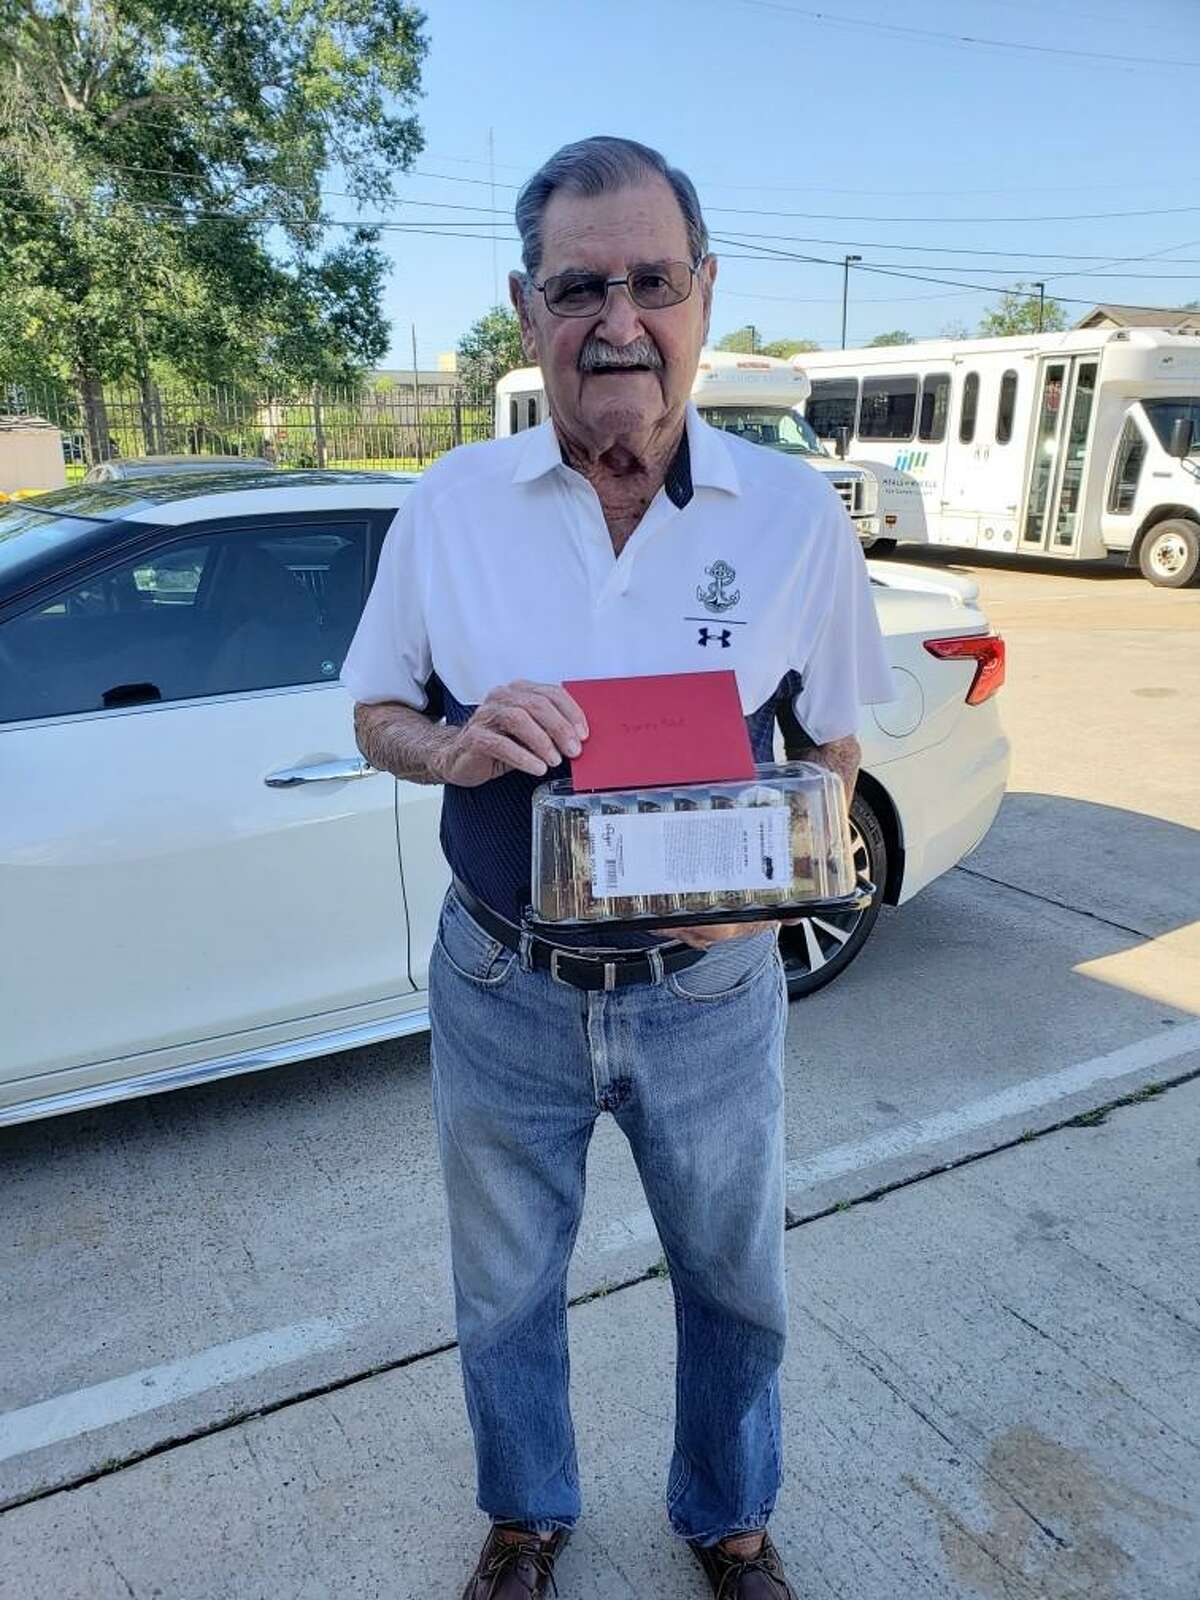 Charles Reed has been a meal delivery volunteer for 35 years for MOWMC. He is 91 years old and hung up his hat May 26 participating in his last delivery. He has a special place in his heart for bringing smiles to seniors and talks with the homebound seniors MOW serves.